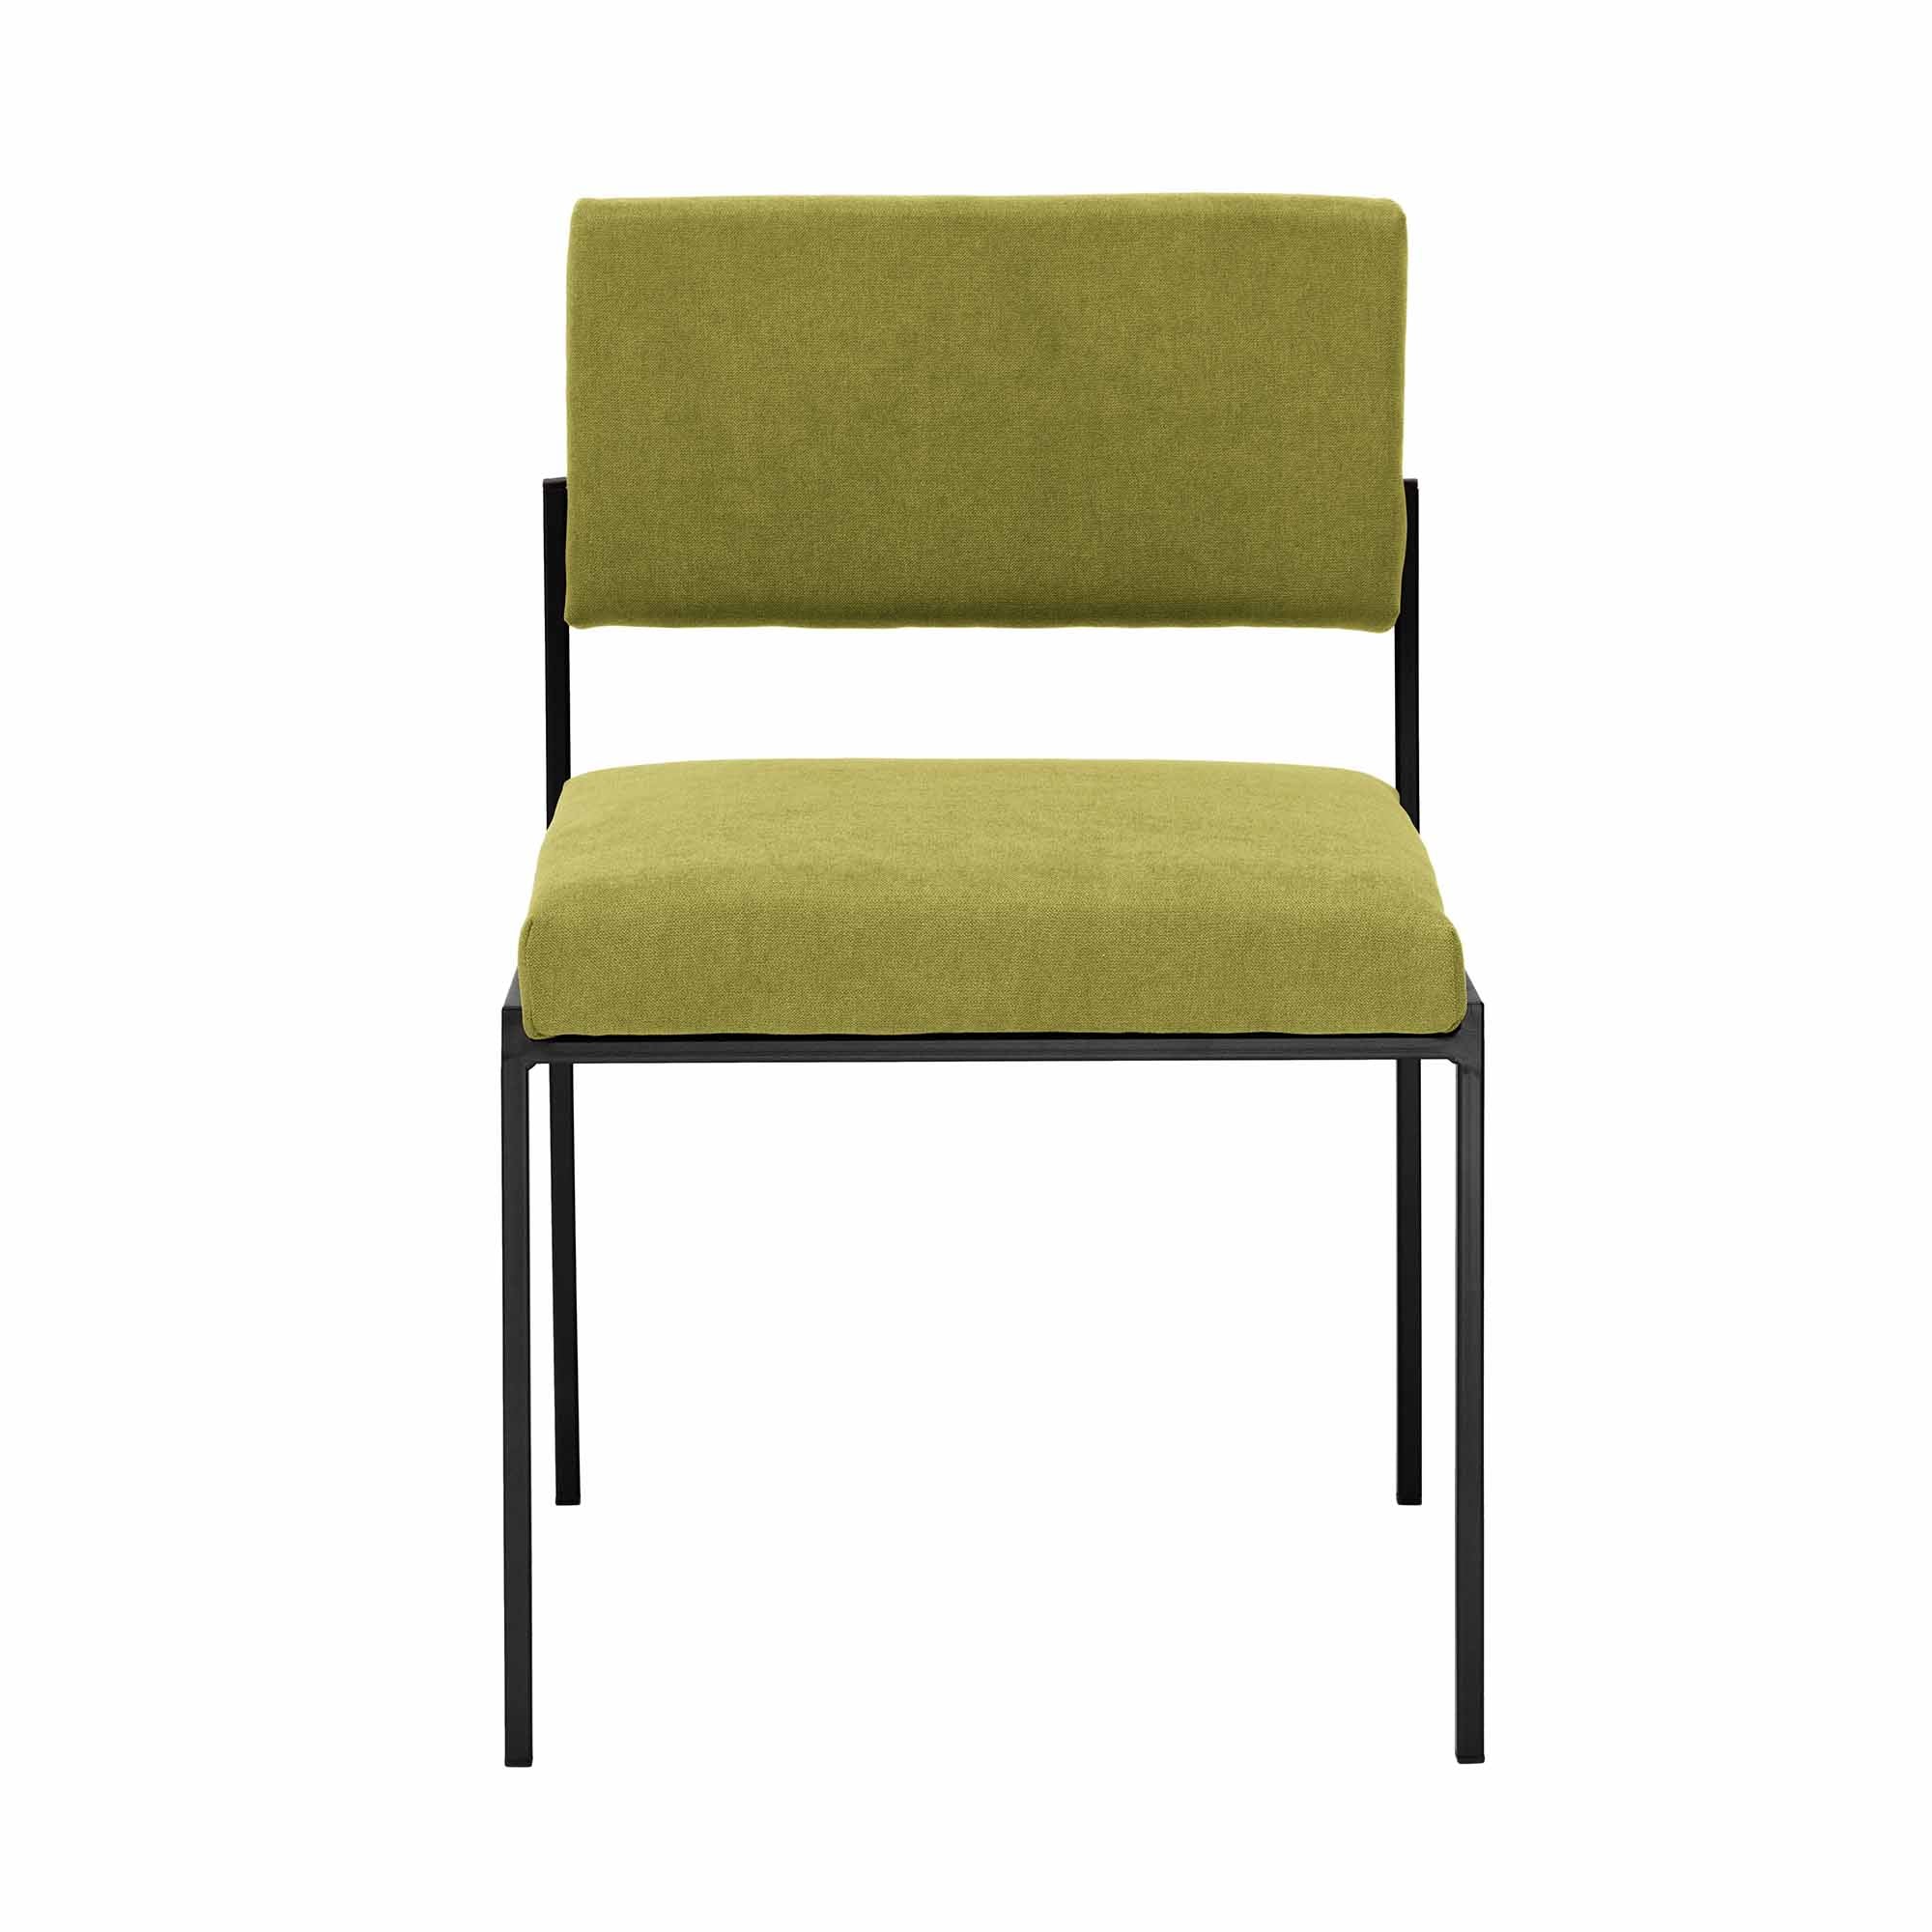  Chair, Powder-Coated Steel Frame, front view green fabirc, black frame